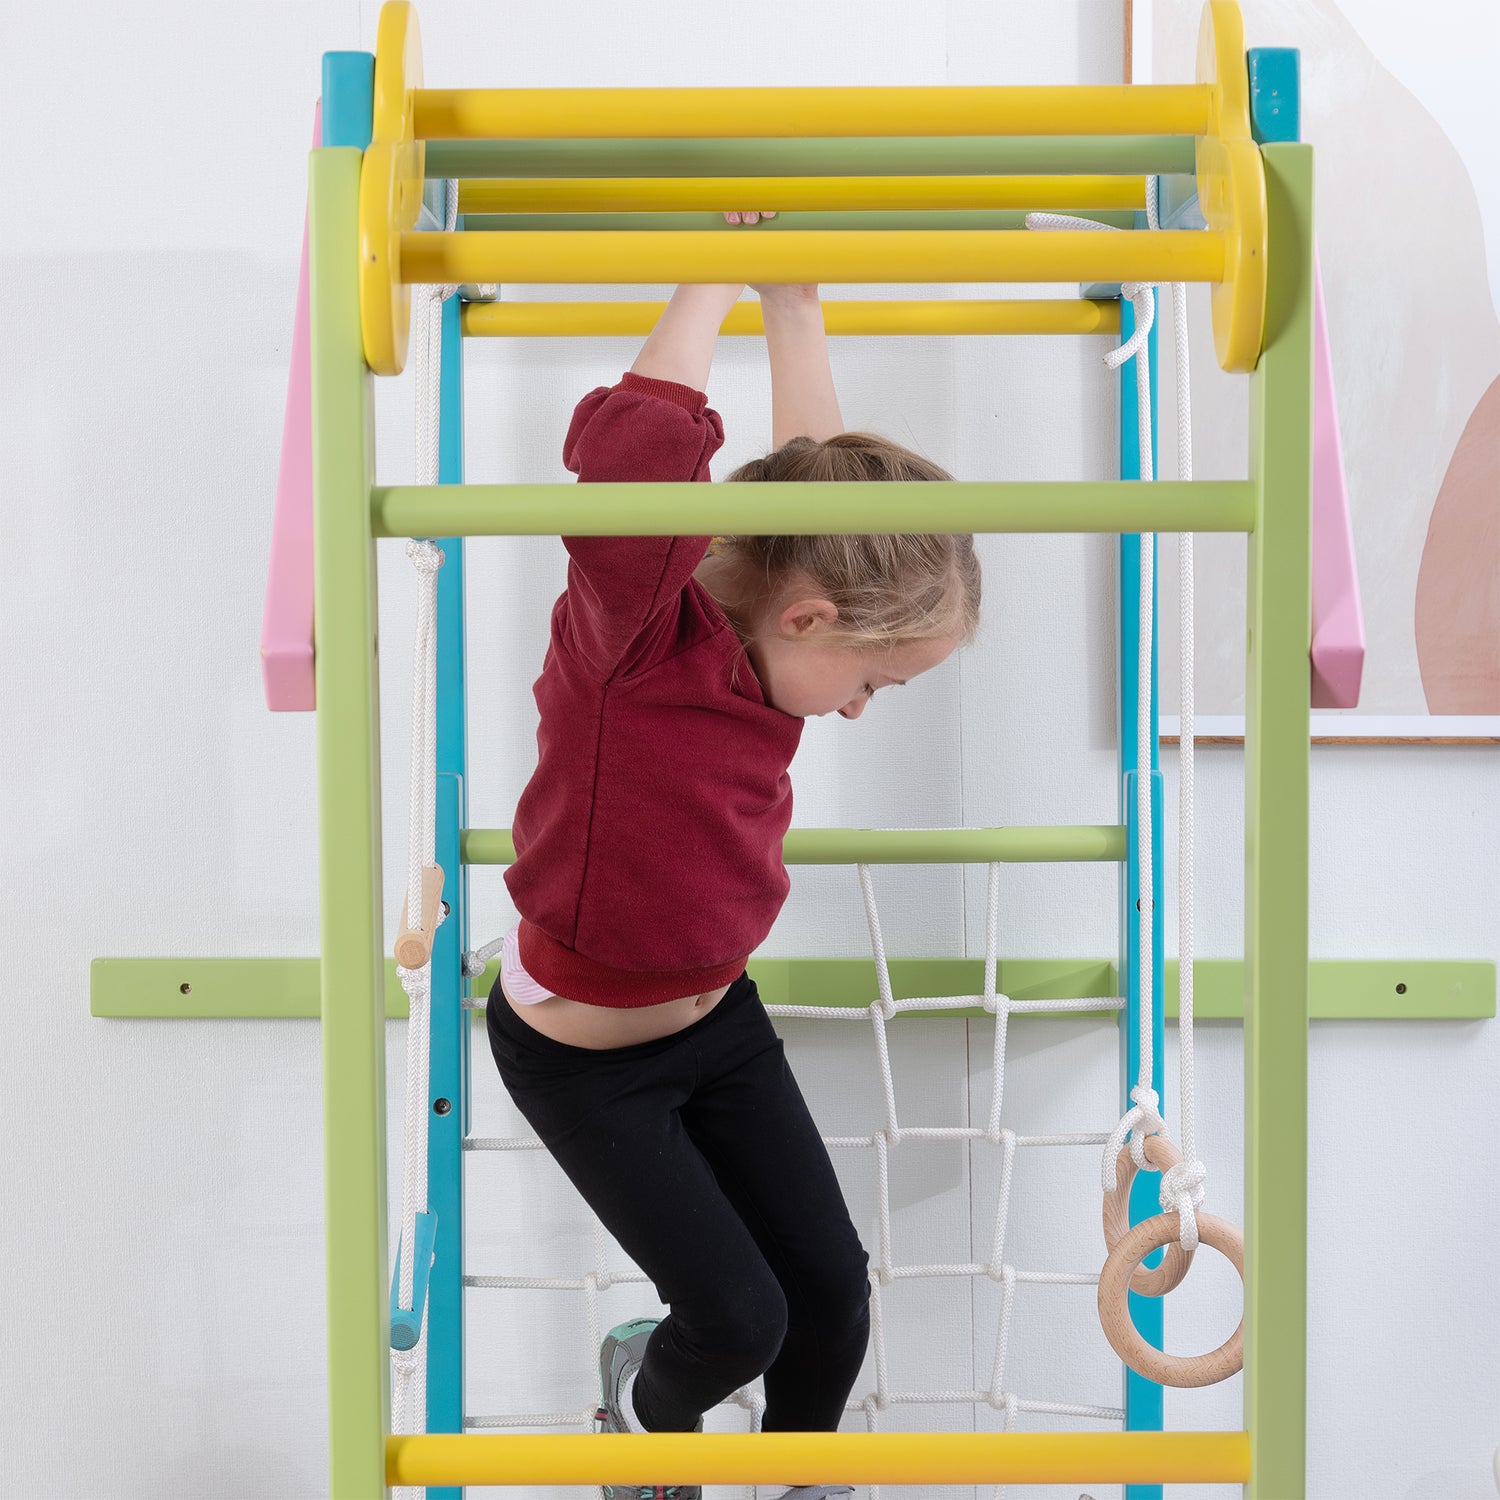 Girl Climbing Bars on The Grove Jungle Gym - Avenlur's Premium 8 in 1 Wooden Playset for Older Kids - Colorful Edition